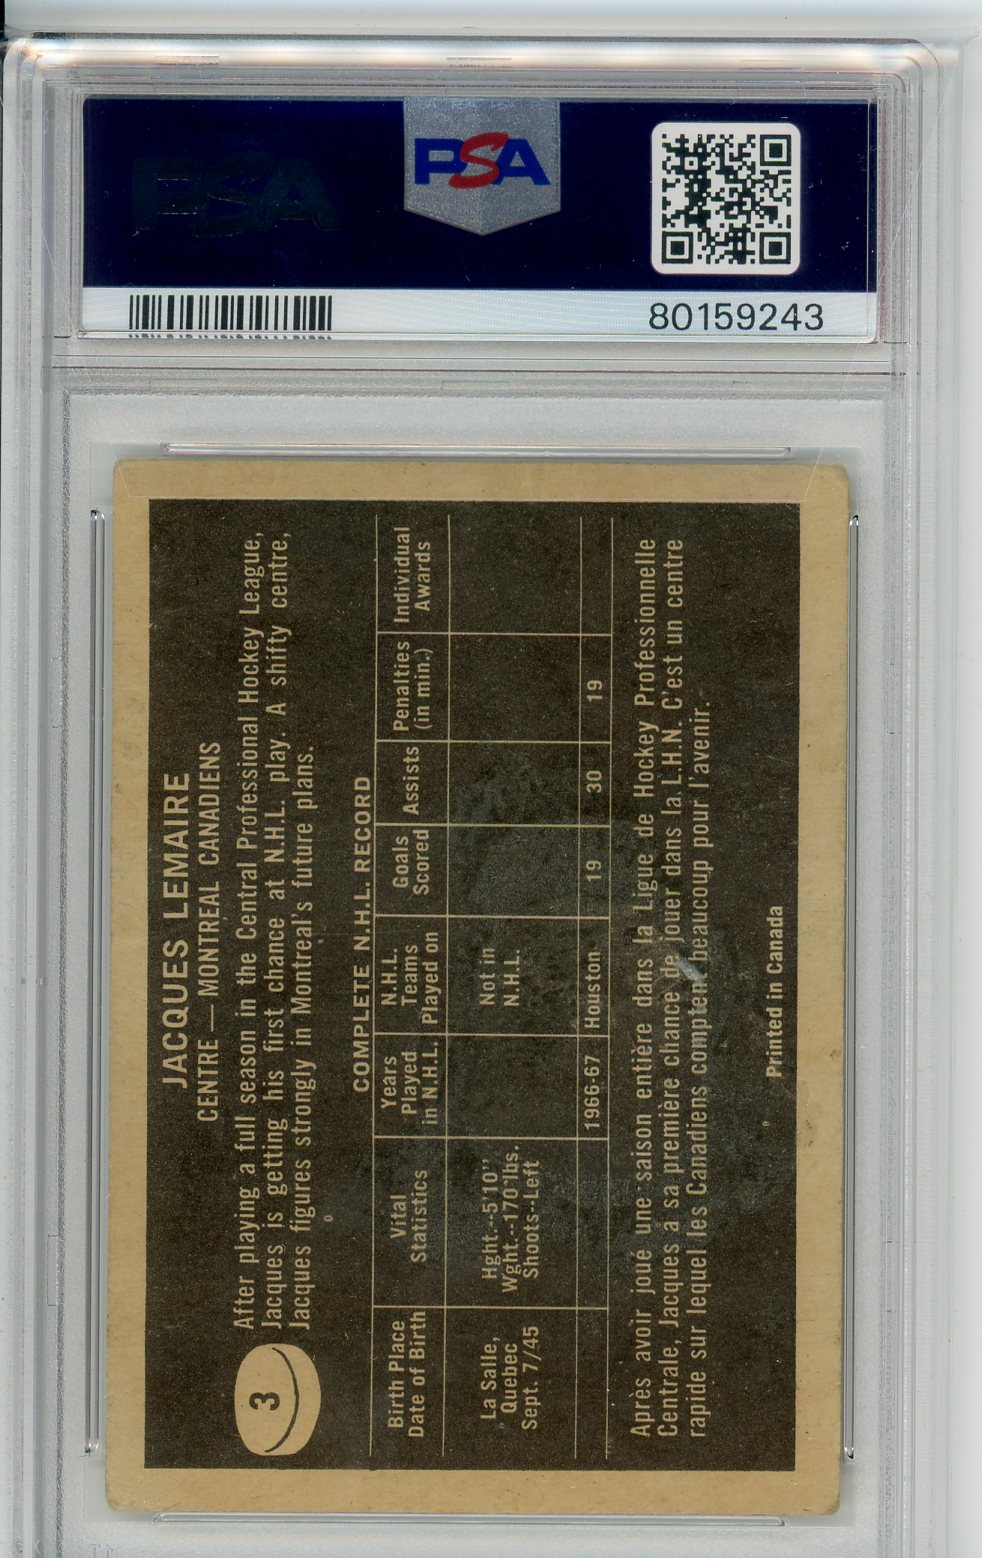 1967 Topps Jacques Lemaire Graded Rookie Card PSA 1